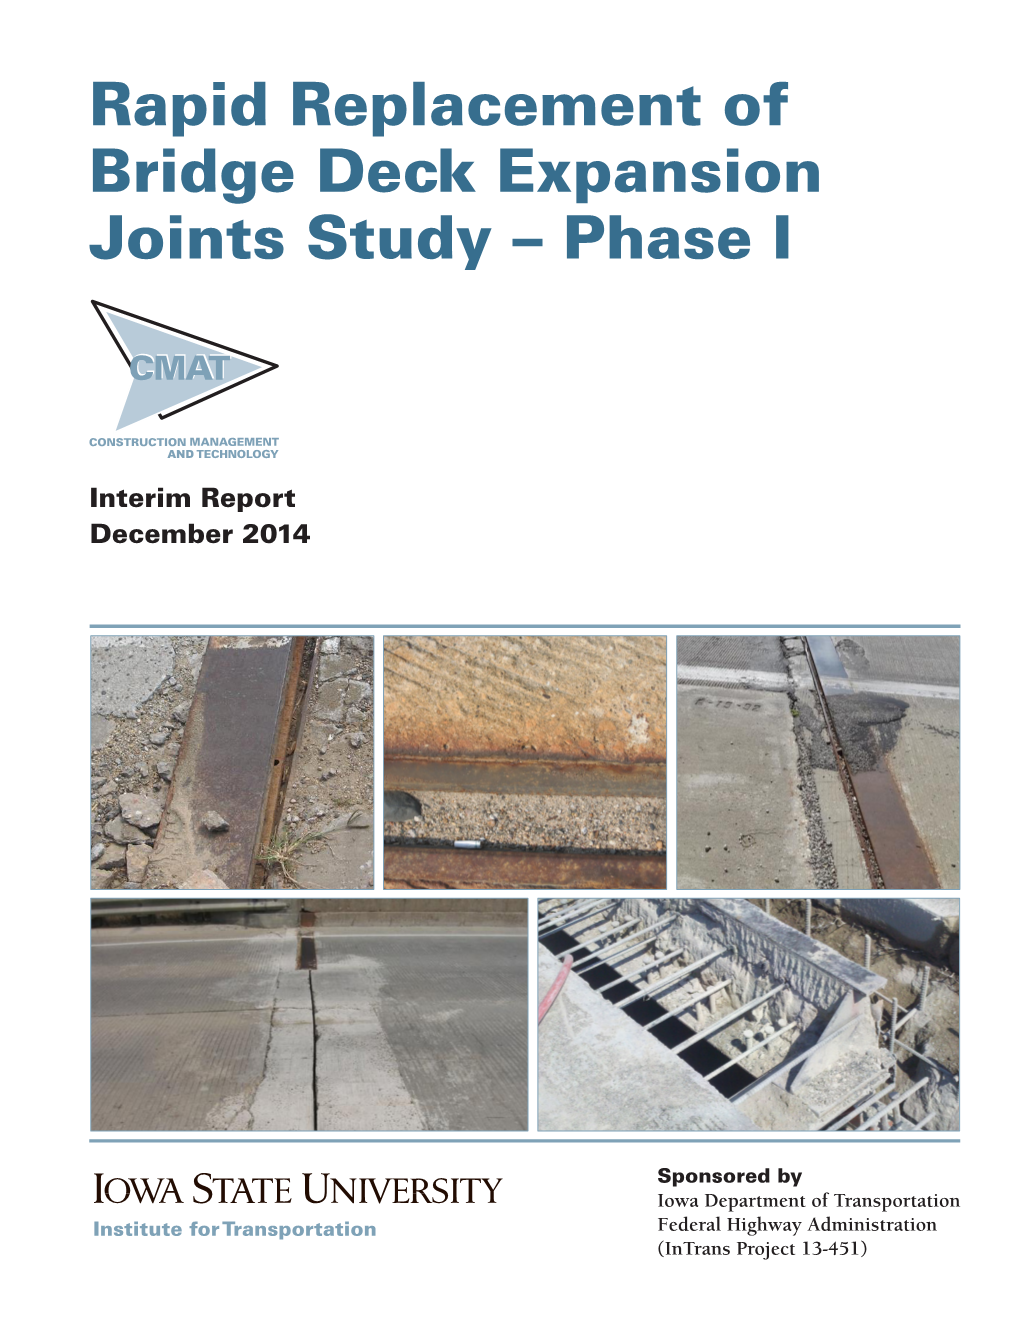 Rapid Replacement of Bridge Deck Expansion Joints Study – Phase I